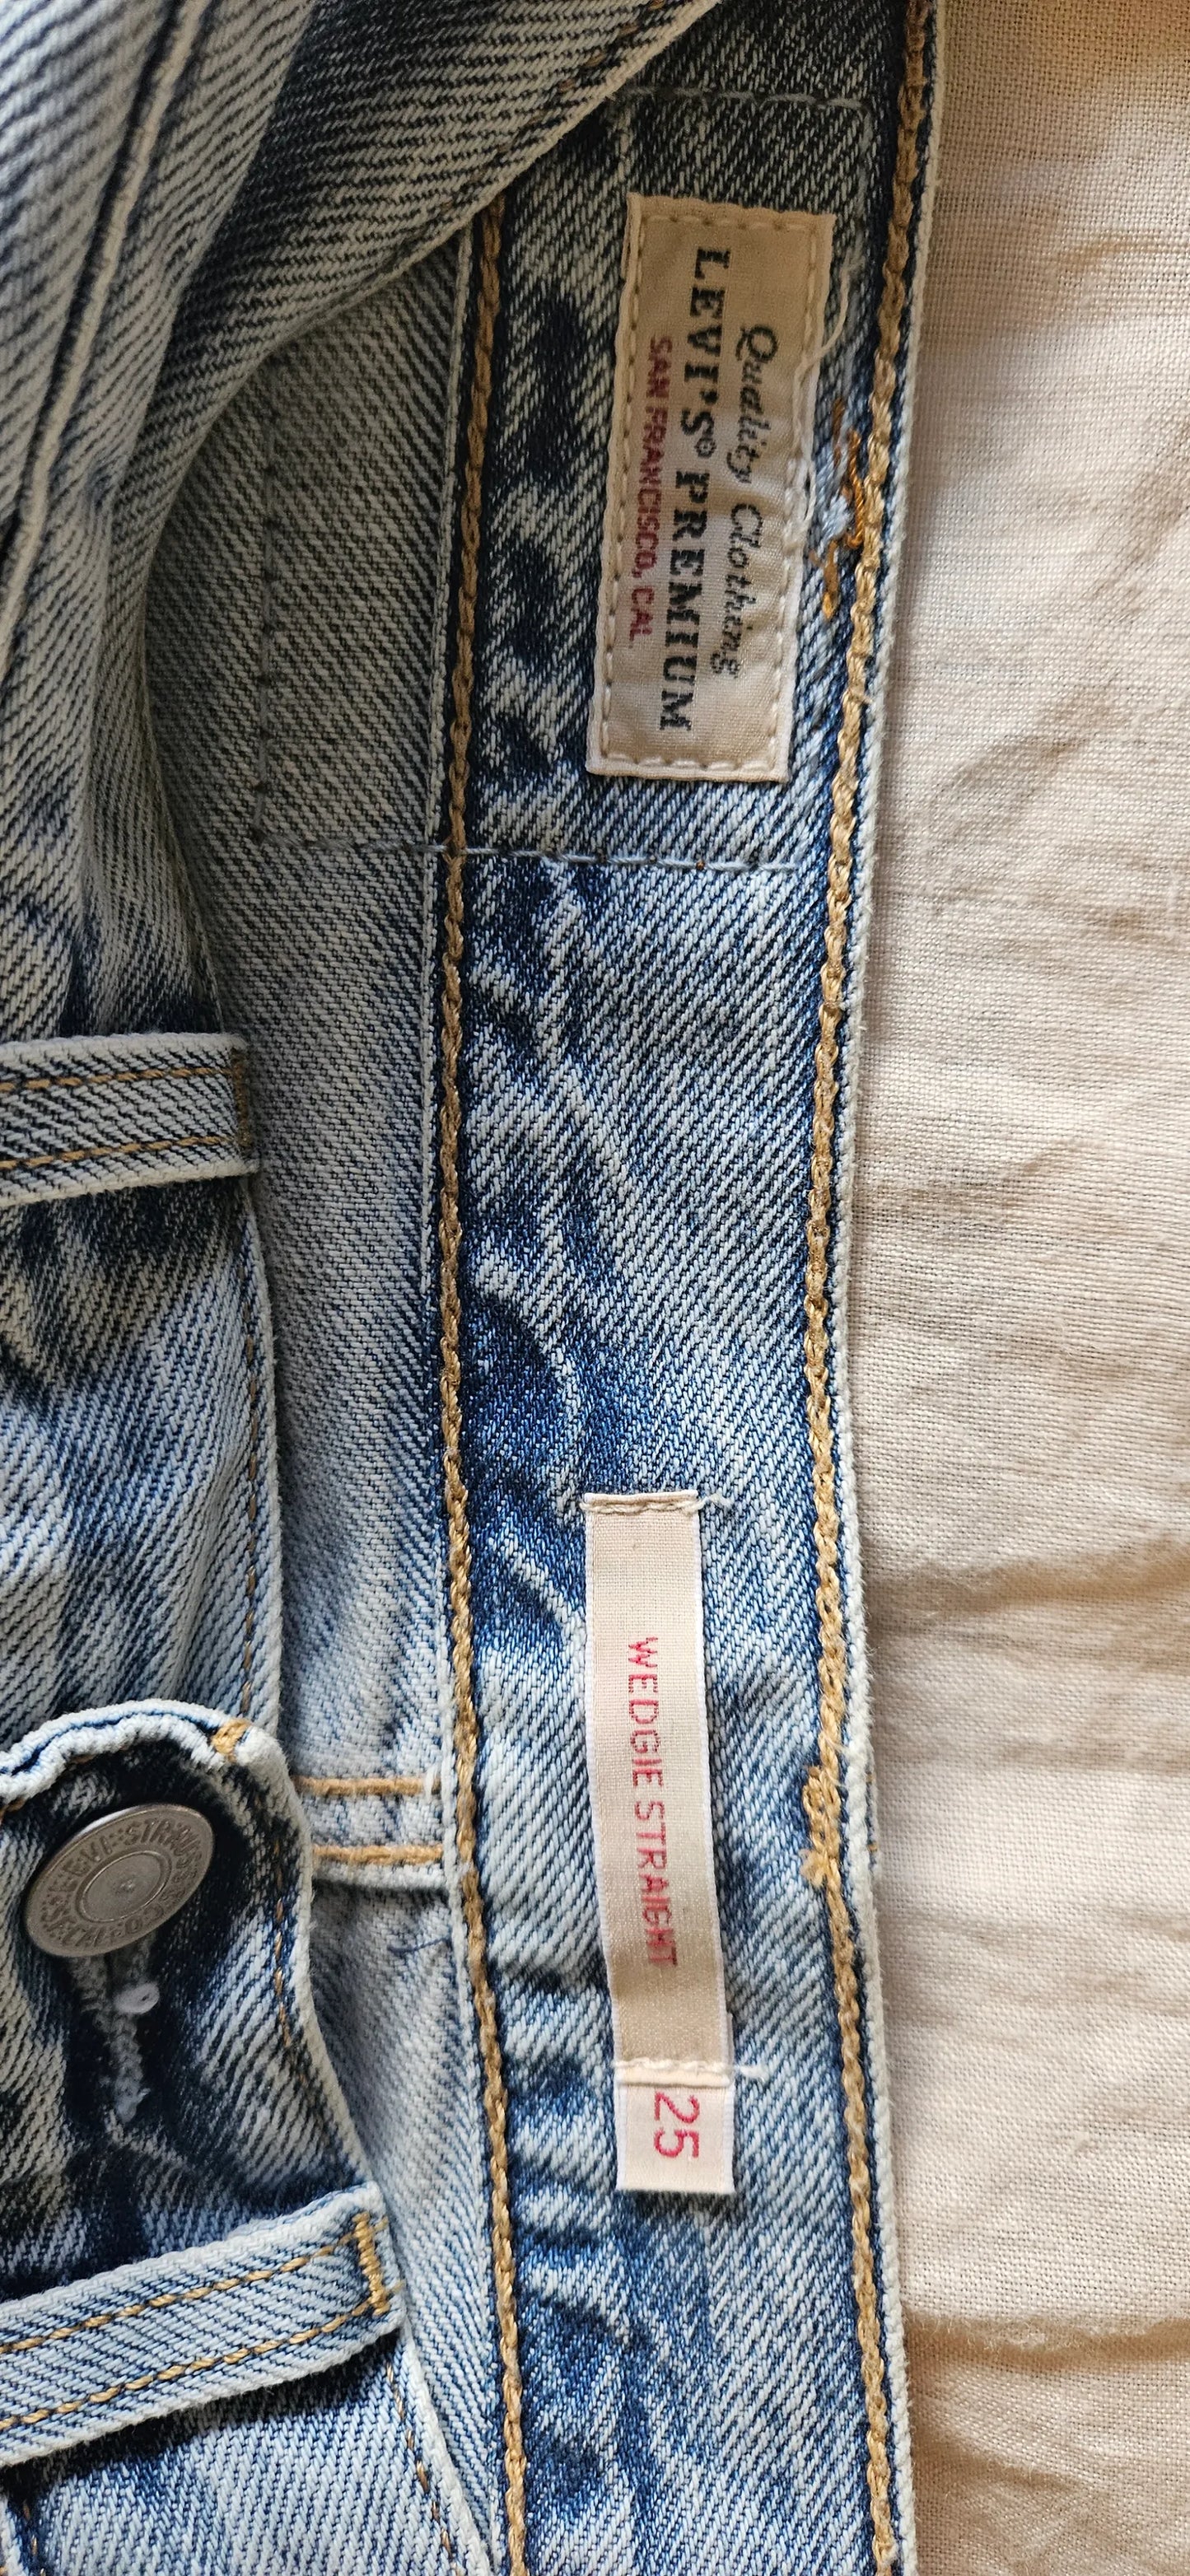 Levi's Wedgie Straight-jeans